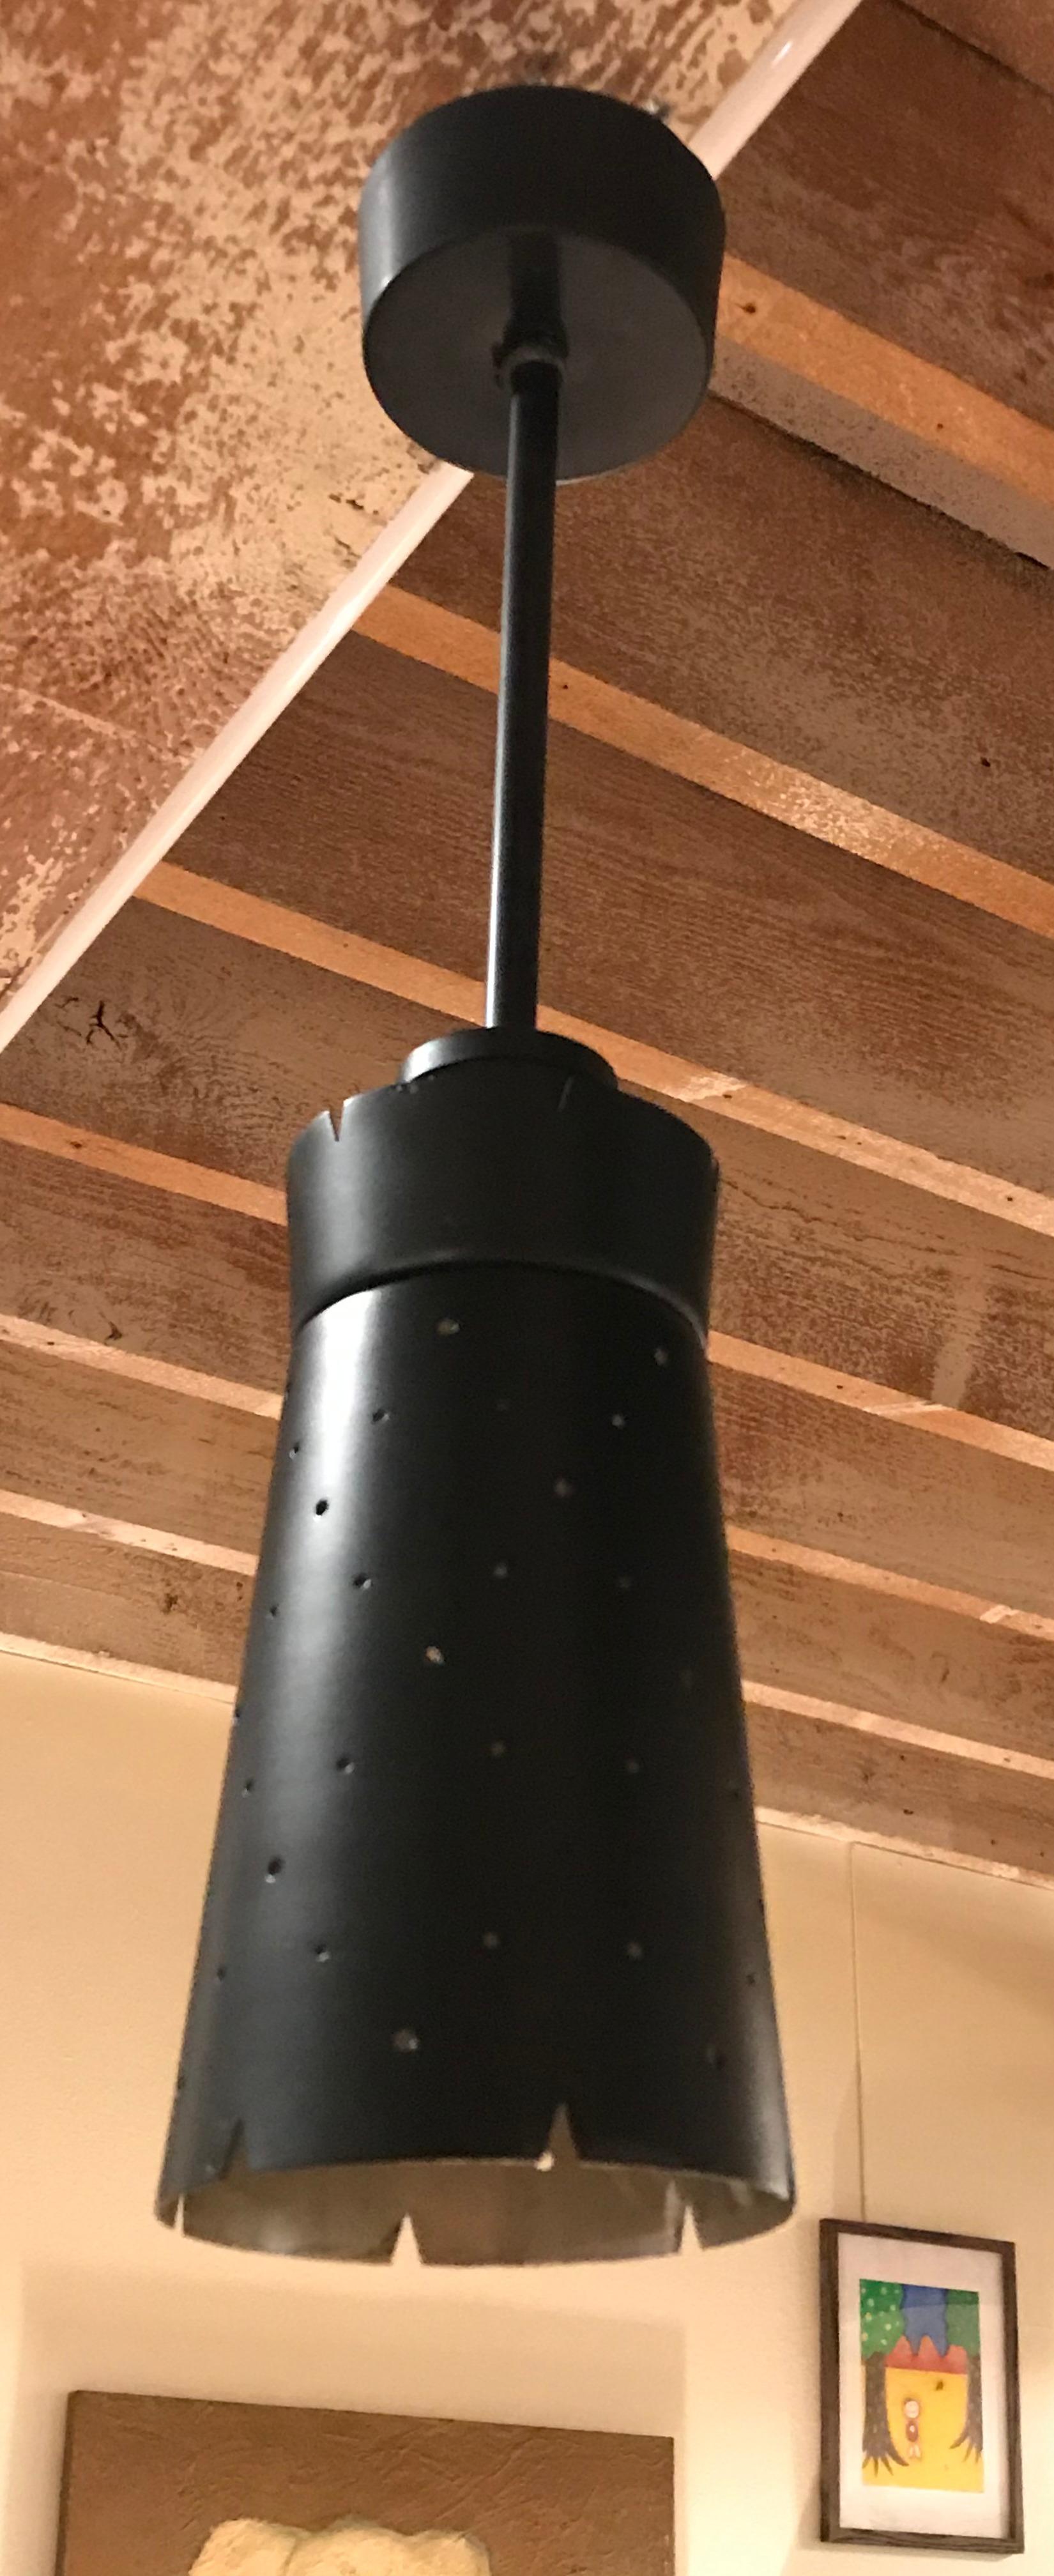 This pendant light features a starry cone made of black lacquered steel.
The light pierces from the stars and gives a festive atmosphere.